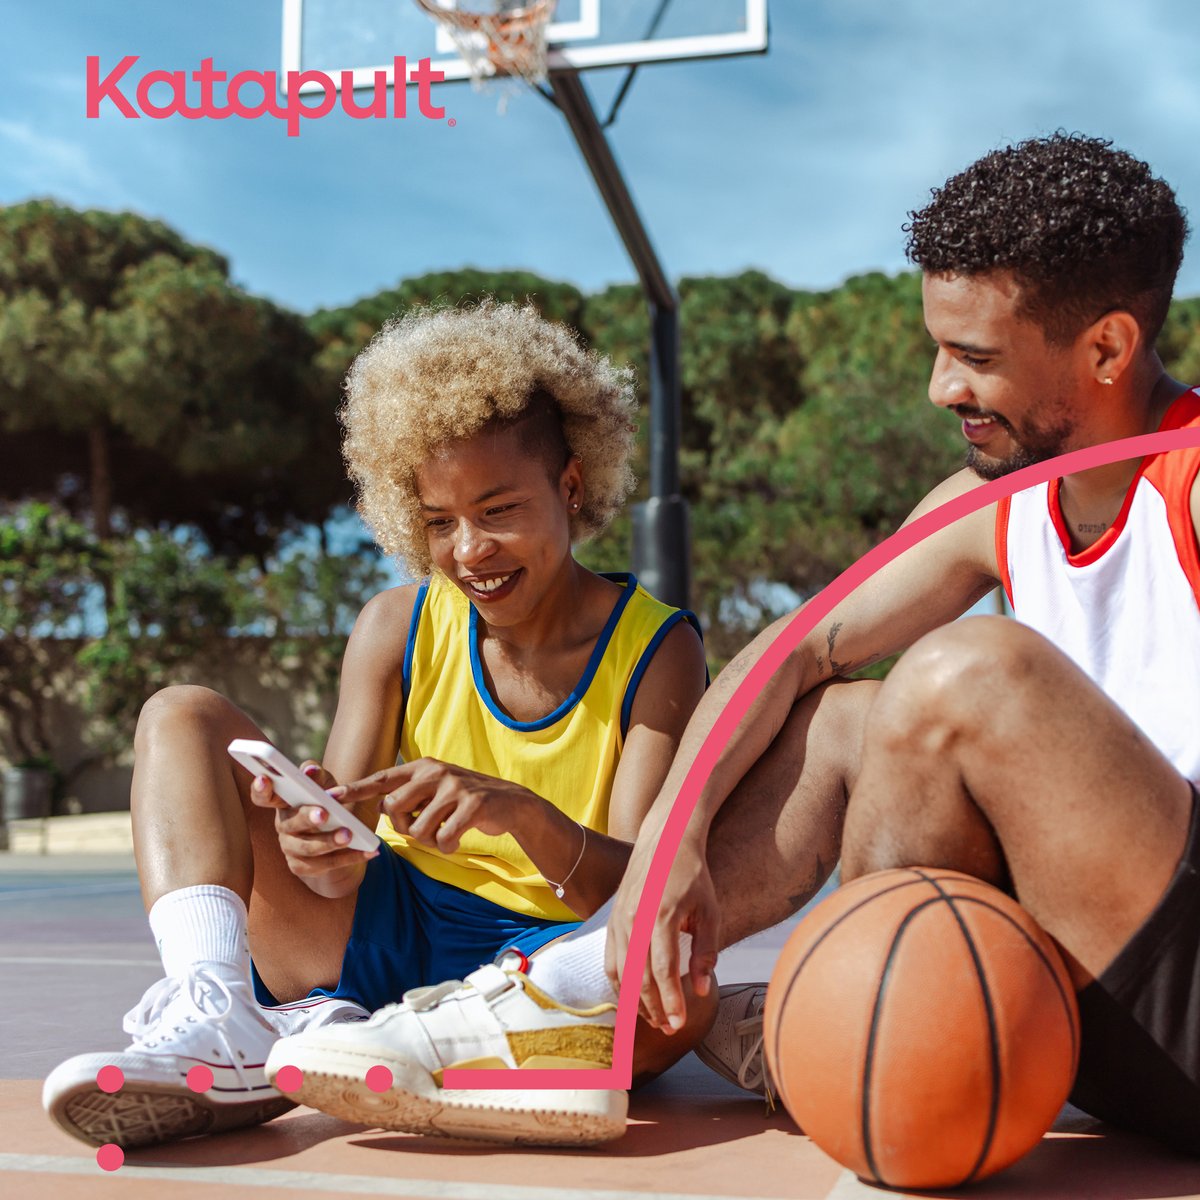 🏀 Score big! 🏀 Level up your shopping game with Katapult by enjoying three-pointer discounts from your favorite retailers! No credit required and pay over time - it's a win-win situation! hubs.la/Q02pS21M0 #Katapult #Savings #nocredit